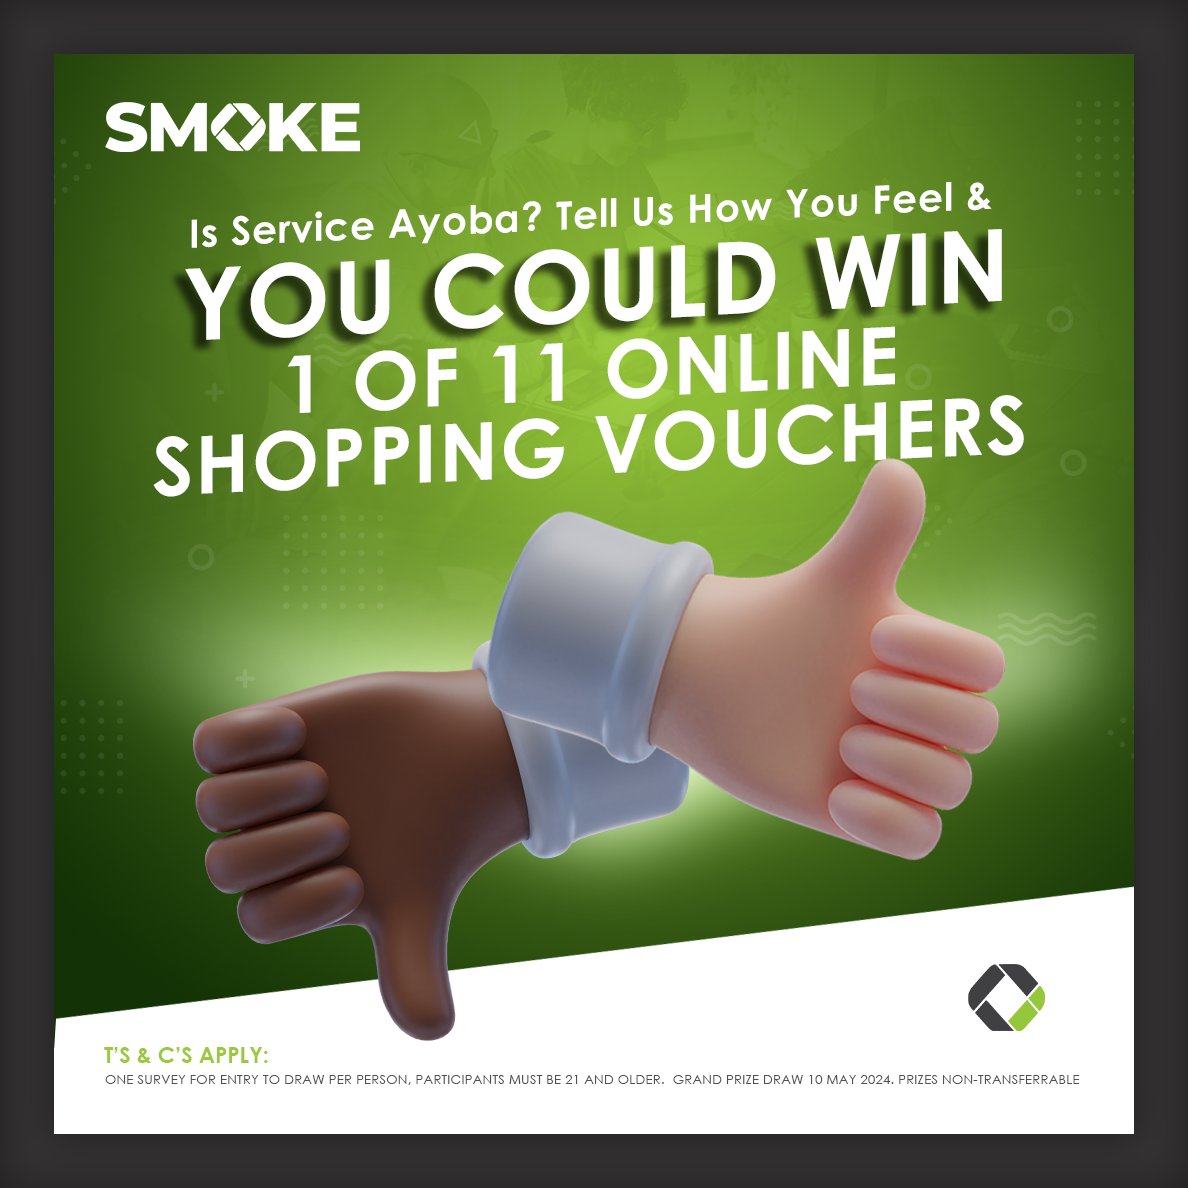 There are 2 weeks left for you to share your feelings on service in South Africa! Complete the survey now: bit.ly/3VMvP2L
T’s & C’s online. 
#Sharethefeeling #SmokeCI #PeopleMatter